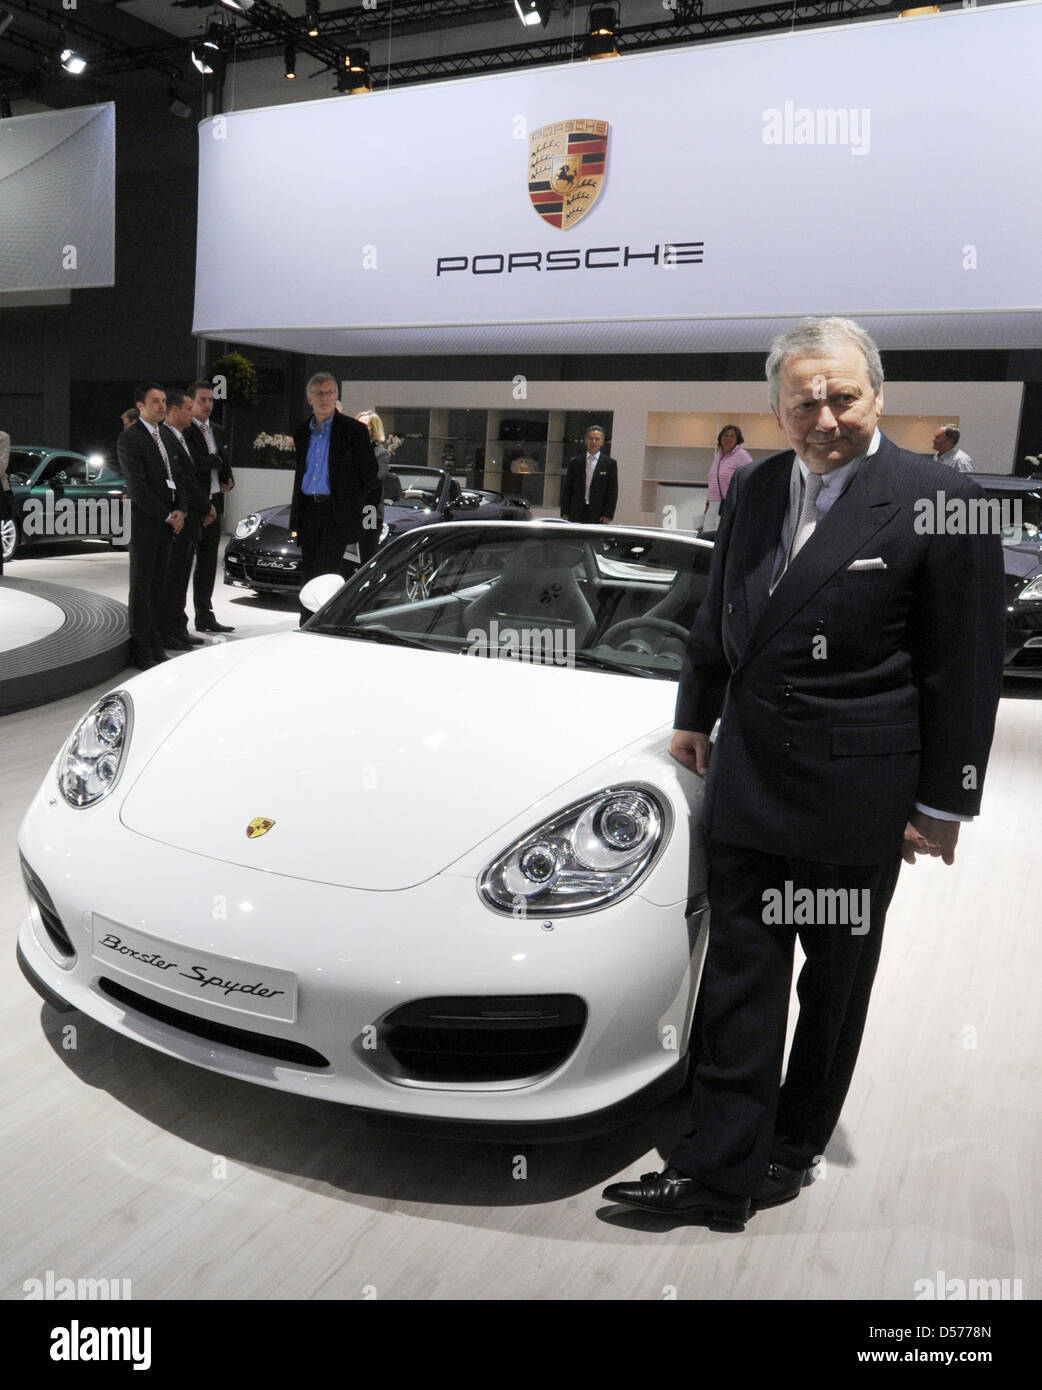 Wolfgang Porsche, chairman of the Porsche AG supervisory board, poses next to a Porsche Boxter Spyder prior to the general meeting of Volkswagen AG in Hamburg, Germany, 22 April 2010. Europe's largest automaker Volkswagen increased its profits in the first quarter of 2010. The earnings after taxes increased by nearly 95 per cent to 473 million euros, the turnover increased by 19 pe Stock Photo